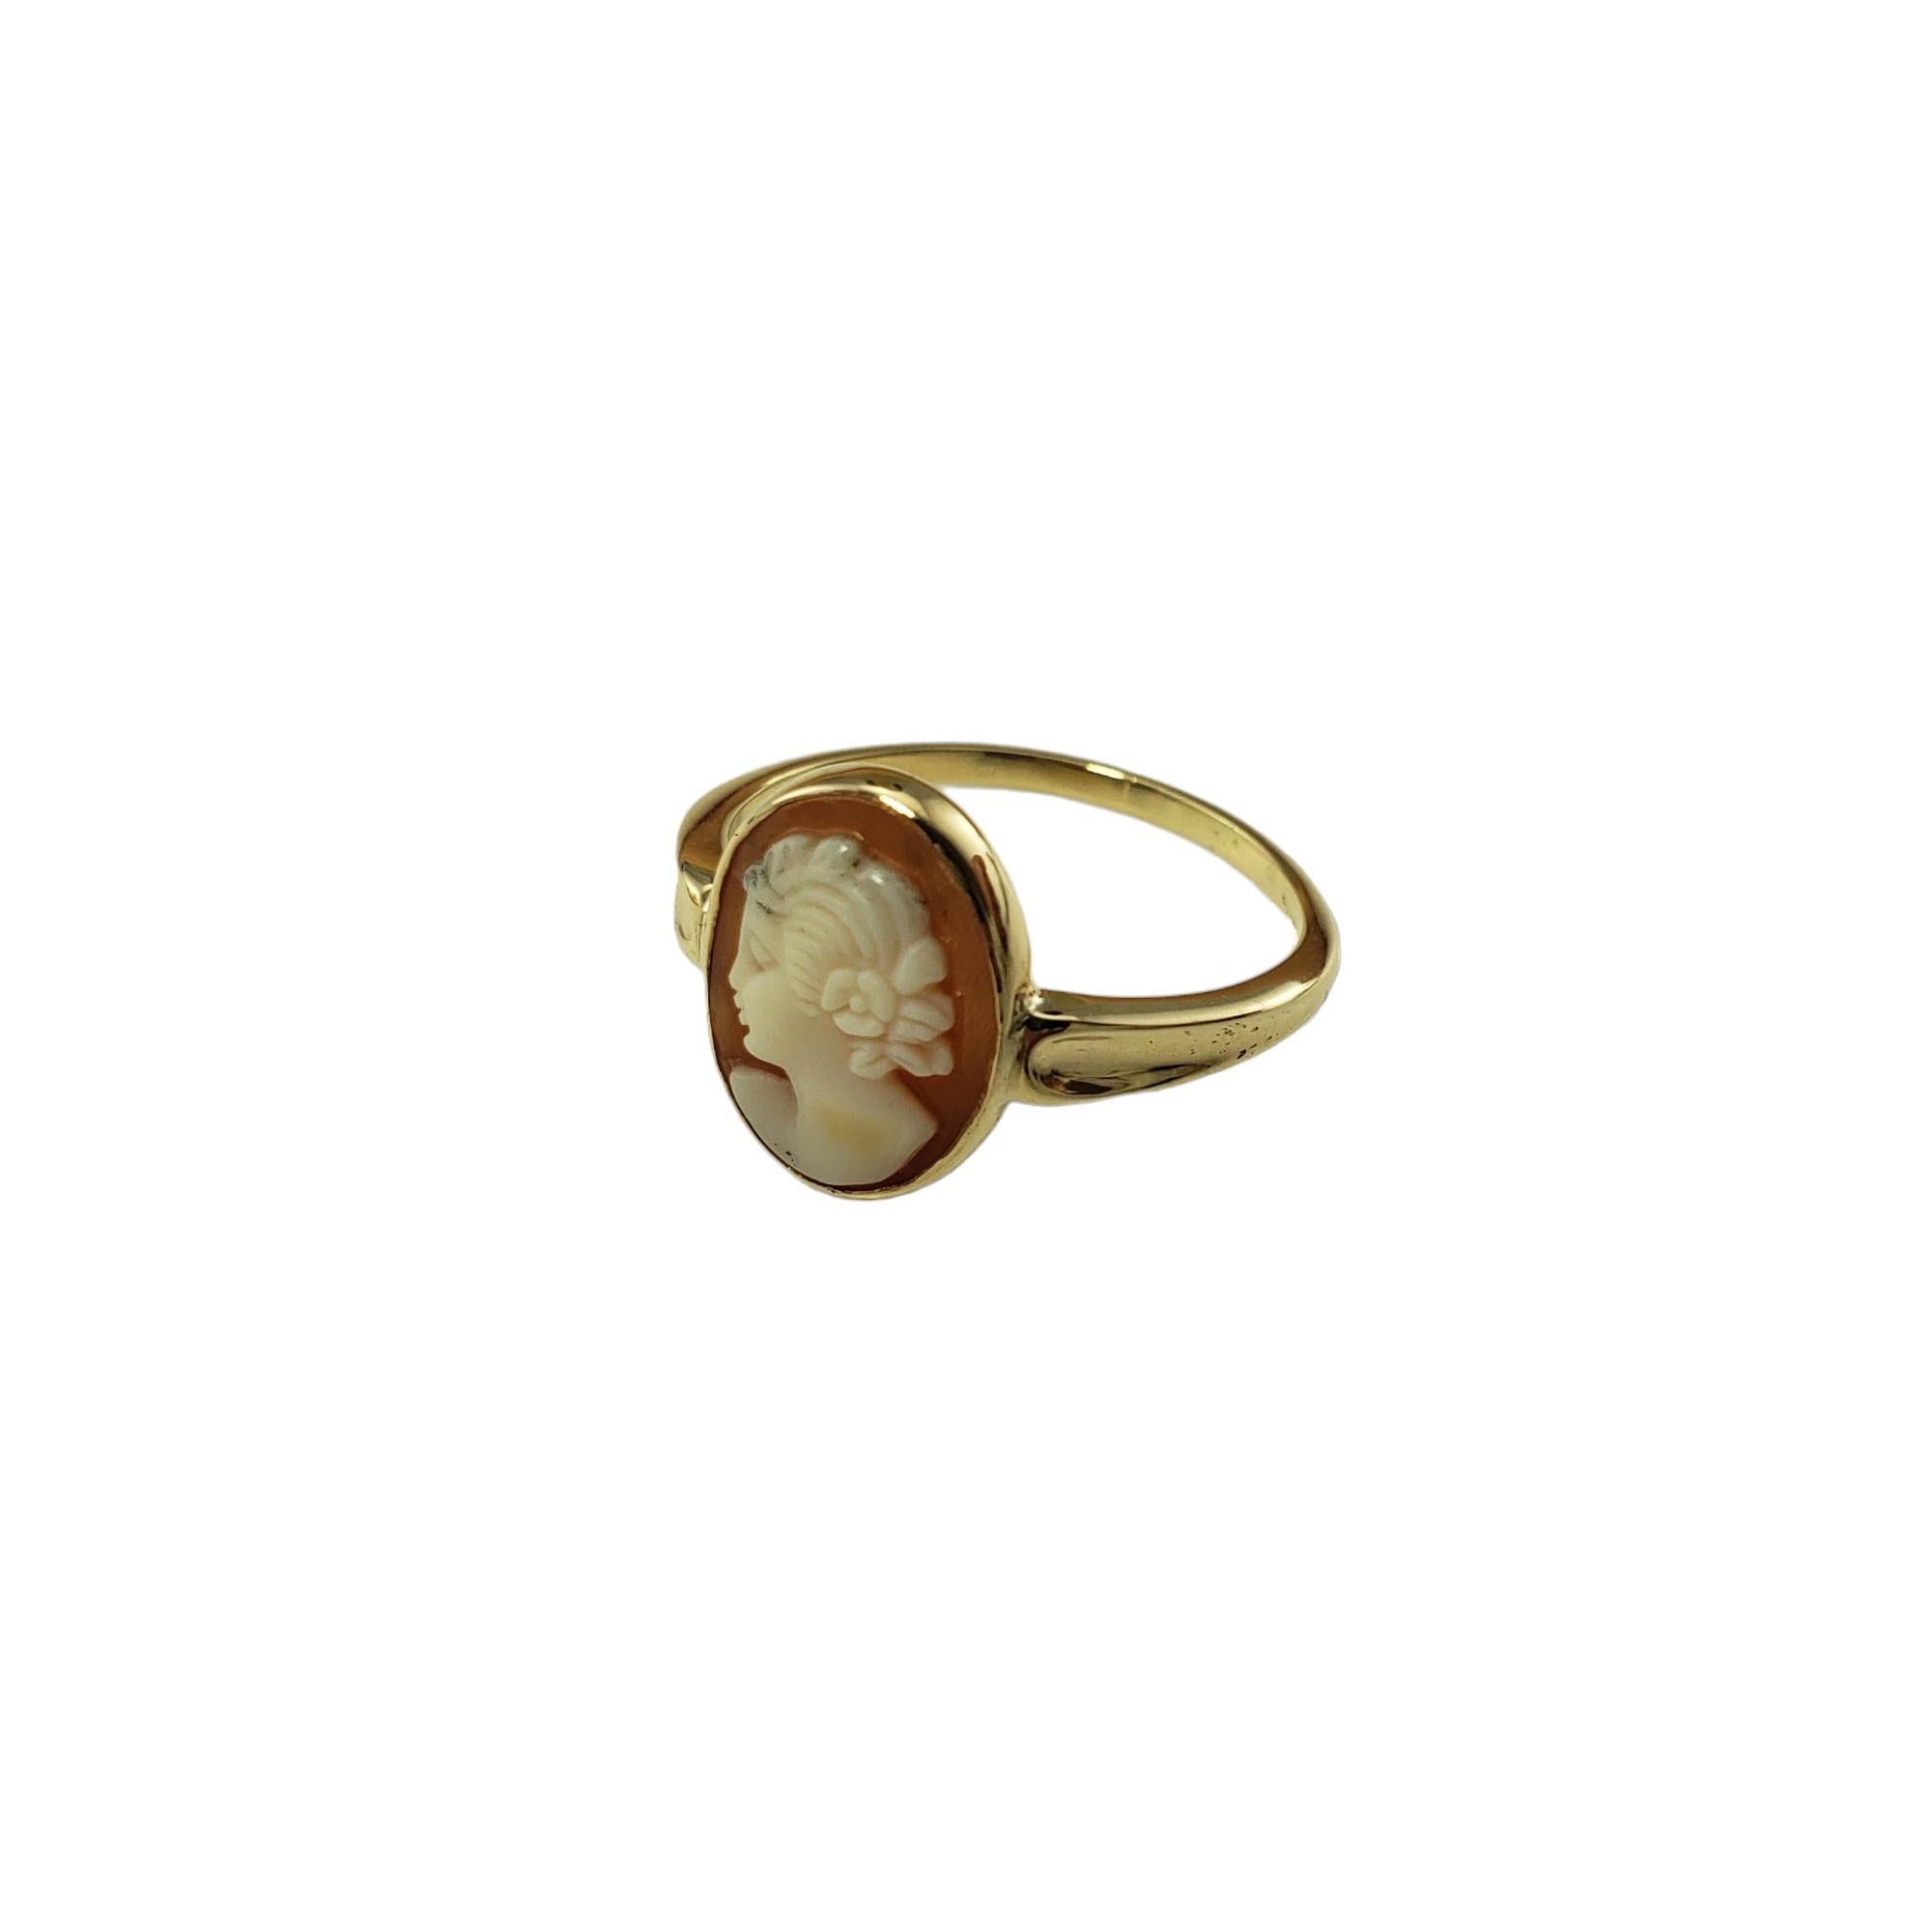 Women's 10 Karat Yellow Gold Cameo Ring Size 8.5 #15506 For Sale